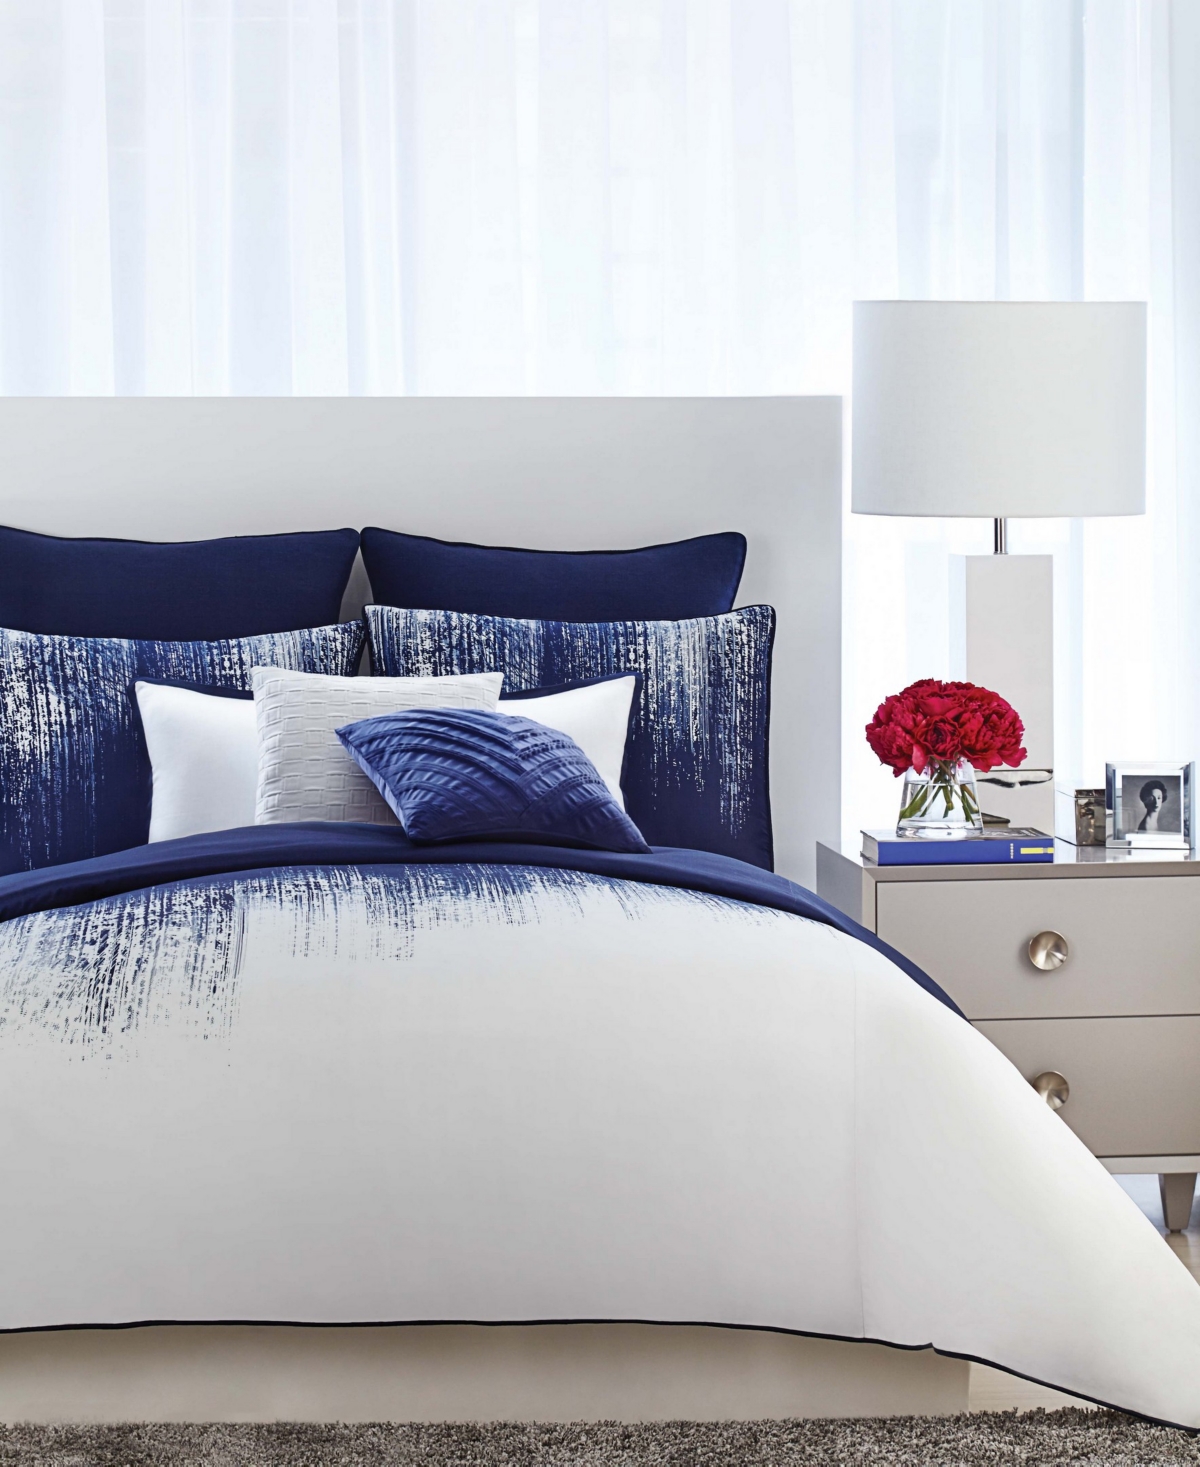 Vince Camuto Home Vince Camuto Lyon King 3 Piece Comforter Set Bedding In Blue And White